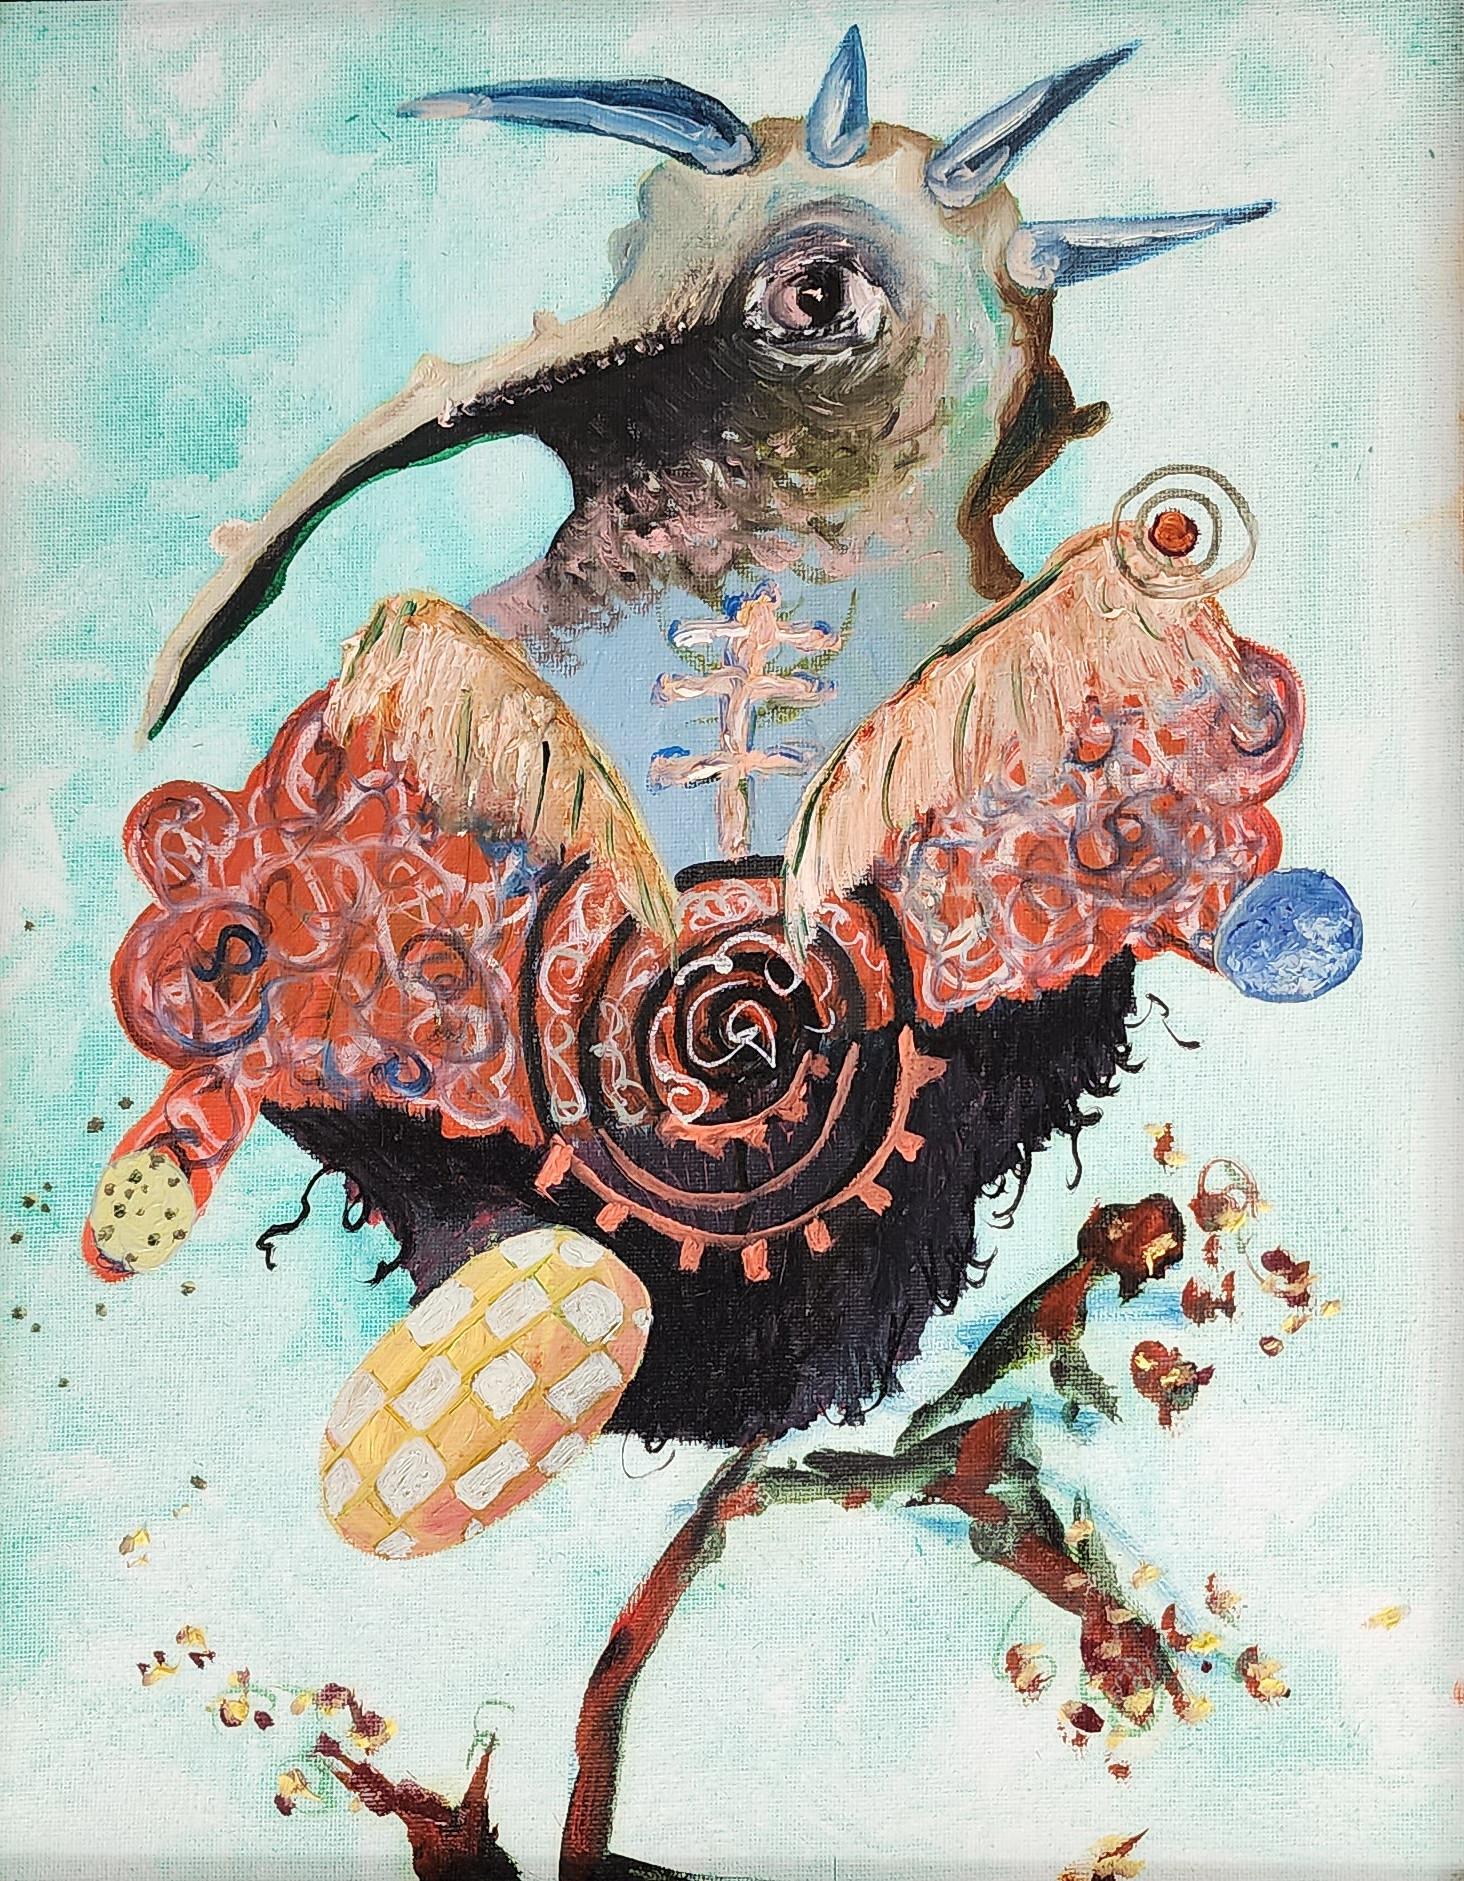 Joseph Broghammer
Wee One 13 (Hummingbird, Portrait, Storytelling, Oil Painting)
Oil on Canvas
Year: 2023
Size: 14x11in
Framed: 15x12x1in
Signed by hand
COA provided
Ref.: 924802-1906

*Framed - ready to hang
** Framed in a black wooden frame

Tags: